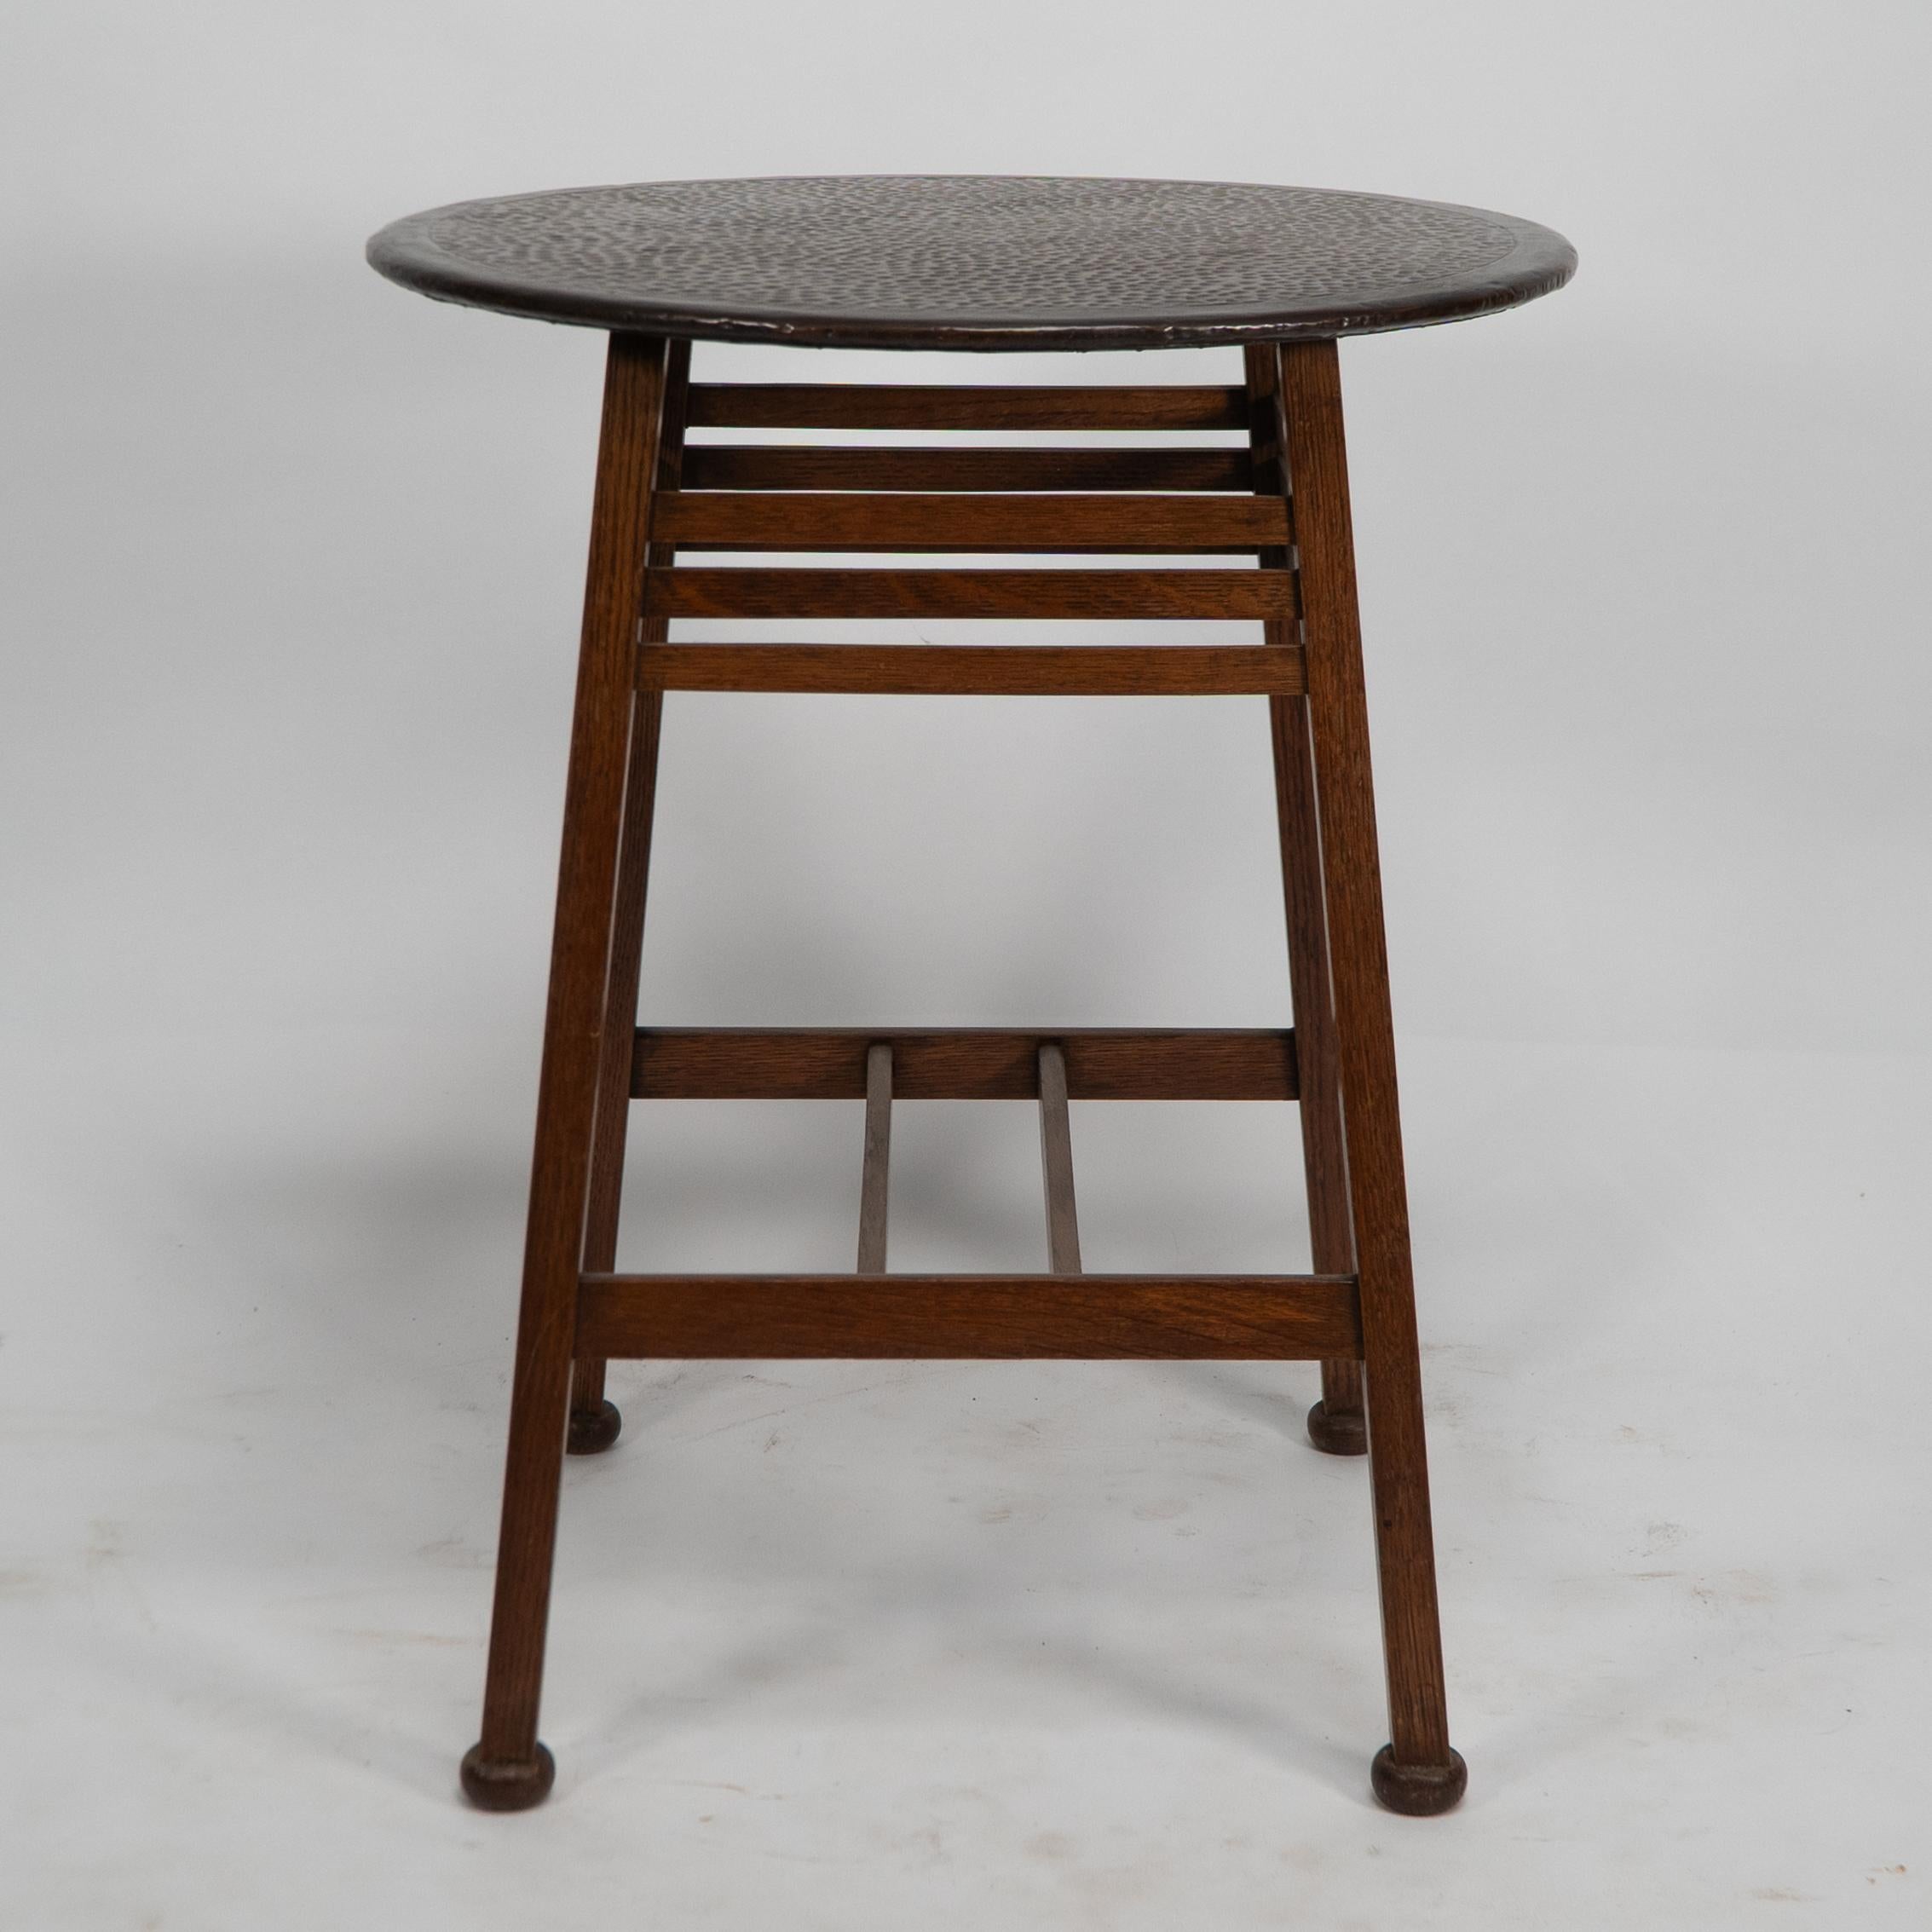 Shapland and Petter. An Arts and Crafts oak side table with a hammered copper top, the legs with applied squashed ball feet are united by three upper horizontal supports and a twin H stretcher.